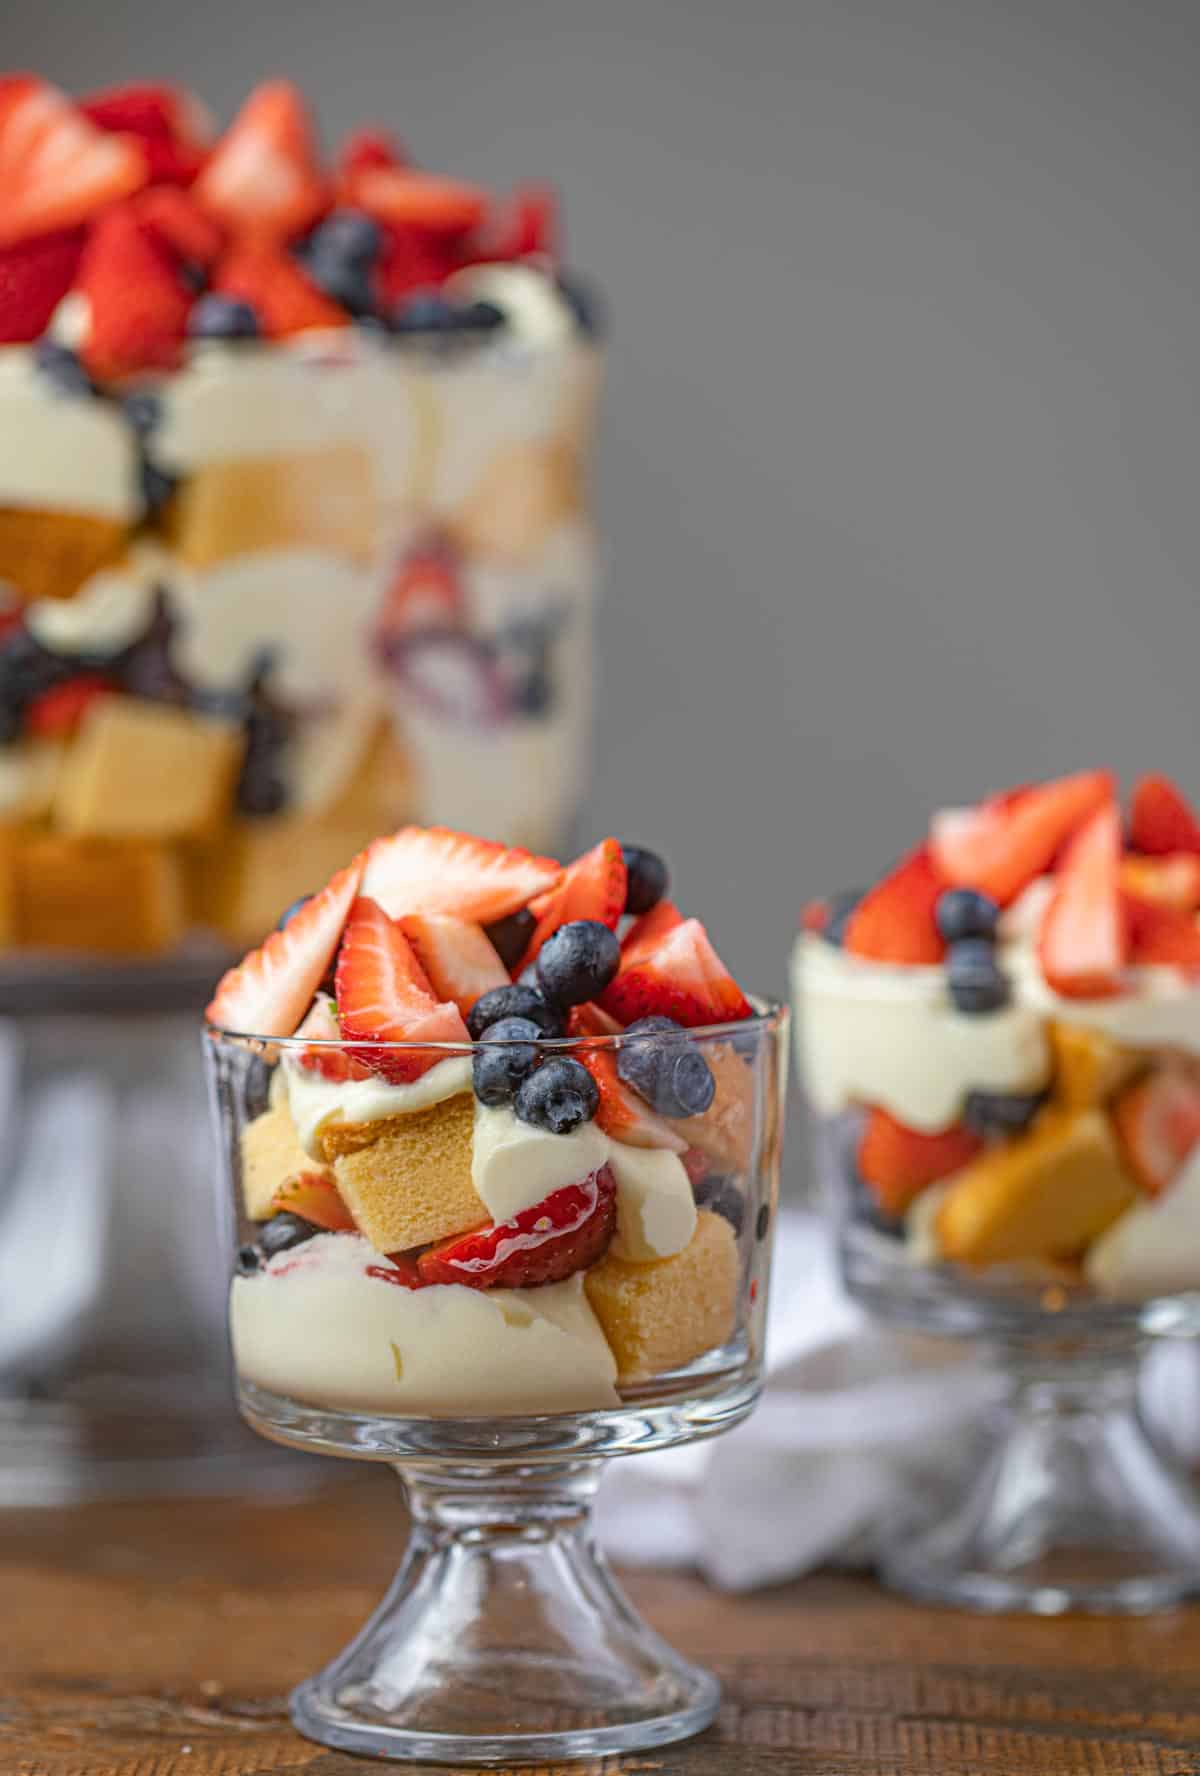 10 Best Fruit Trifle with Custard and Jelly Recipes | Yummly